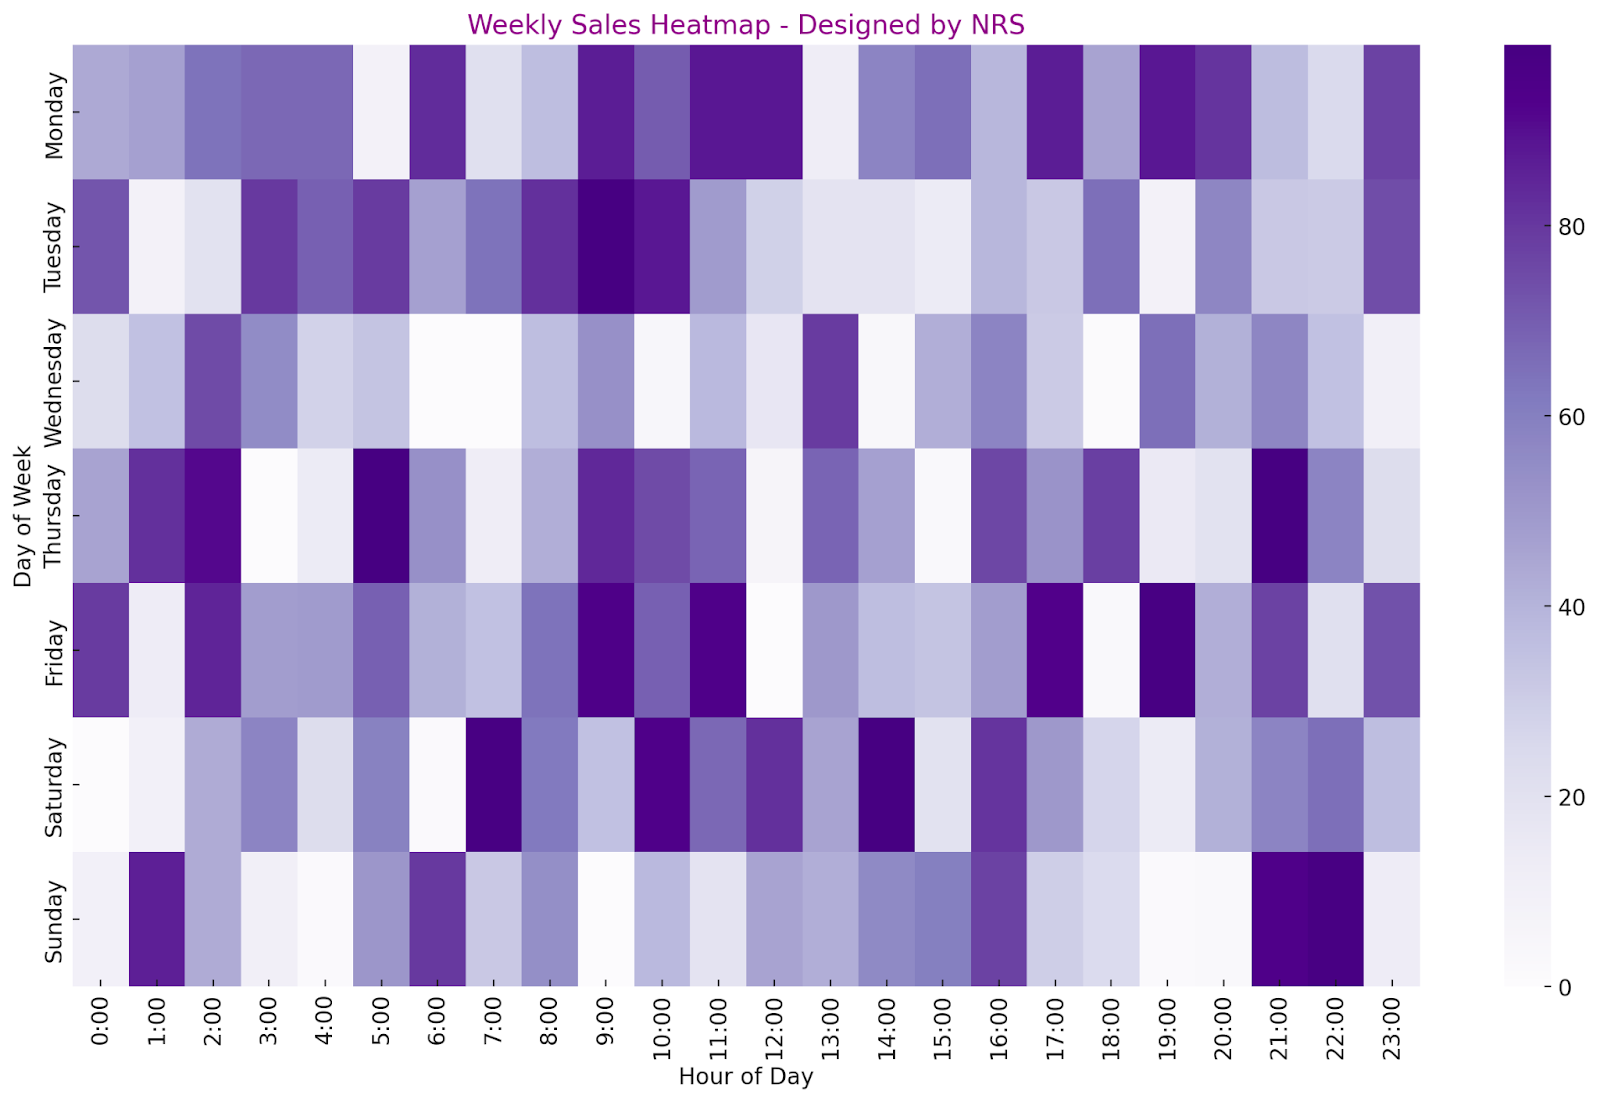 Weekly sales heat map generated from POS data analysis